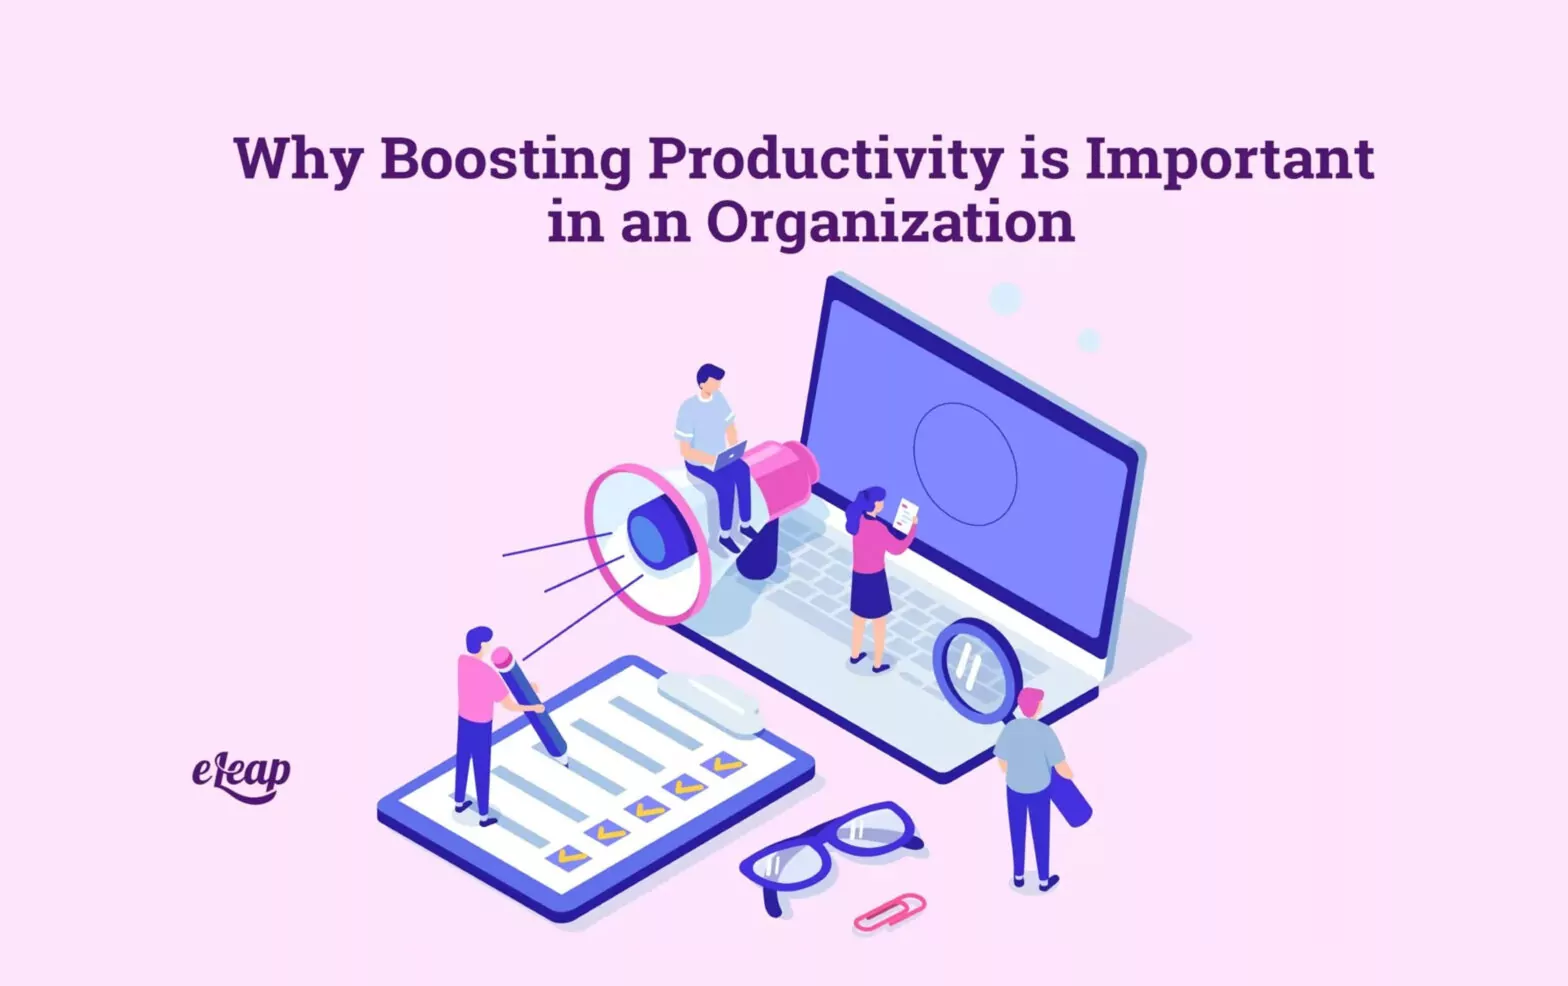 Why Boosting Productivity is Important in an Organization